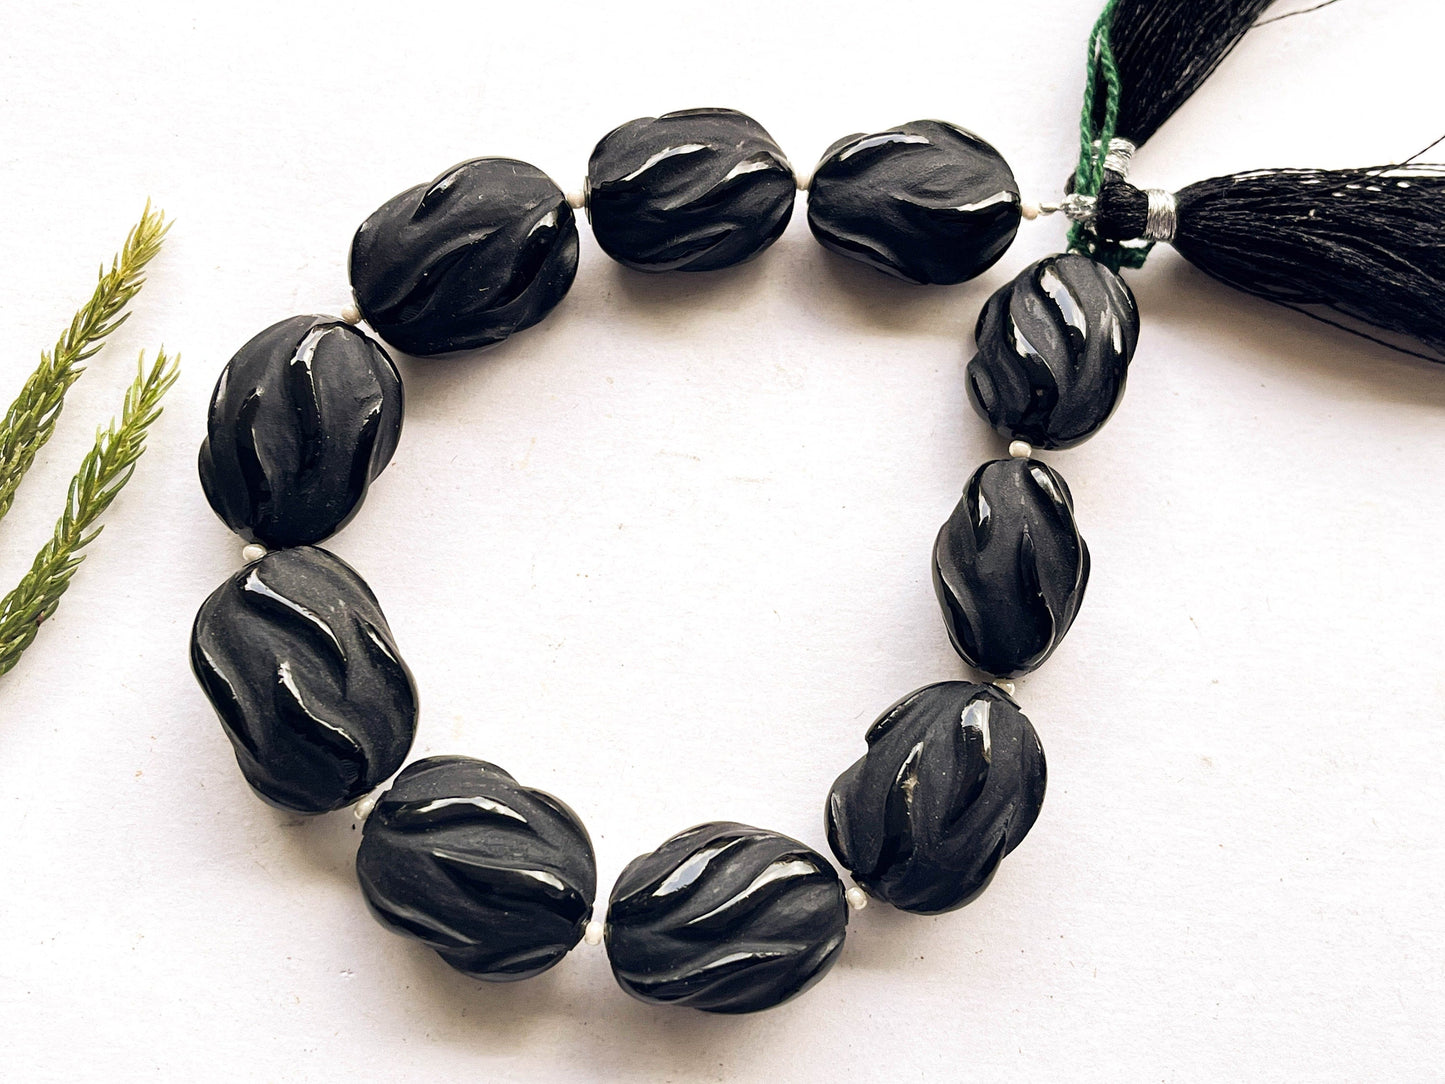 9 Inch Natural Black Onyx Carved Frosted Beads, 10 Pieces Beadsforyourjewelry